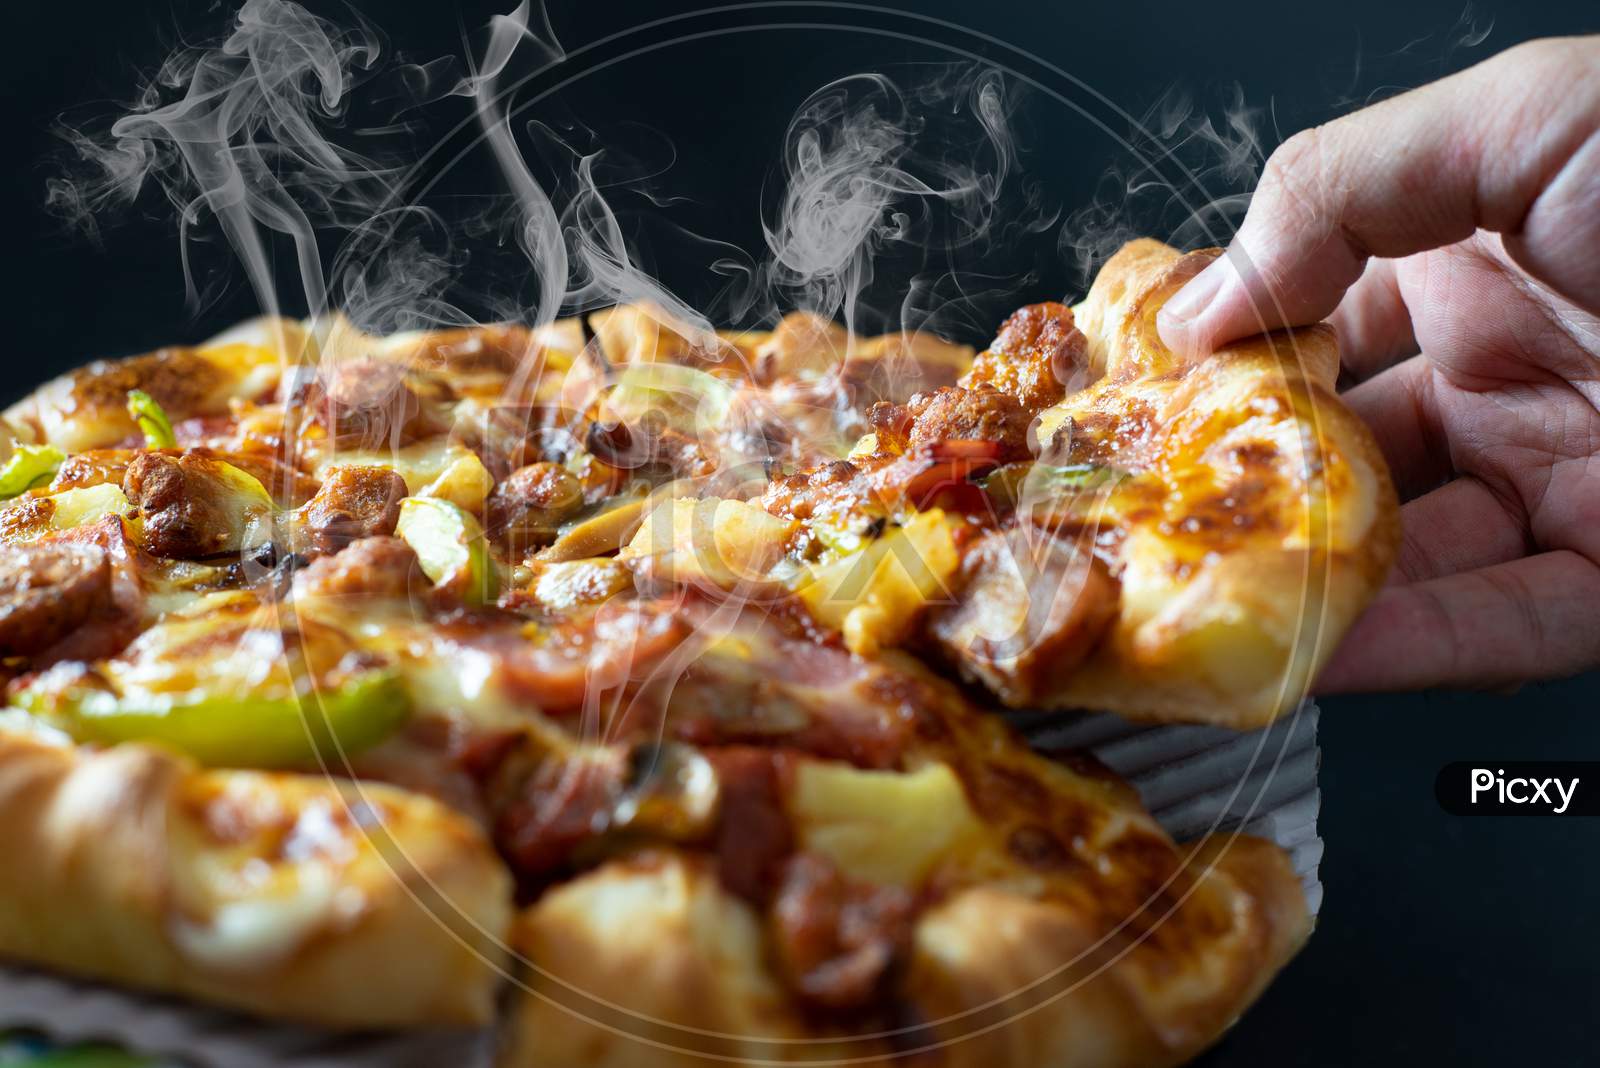 Hand Picking Sliced Pizza With Cheese Ham Bacon And Pepperoni On Black Background With Hot Steaming Smoke. Food And Cooking Concept. Lunch Time Serve And Hungry Theme. Pizza Delivery Service To Home.